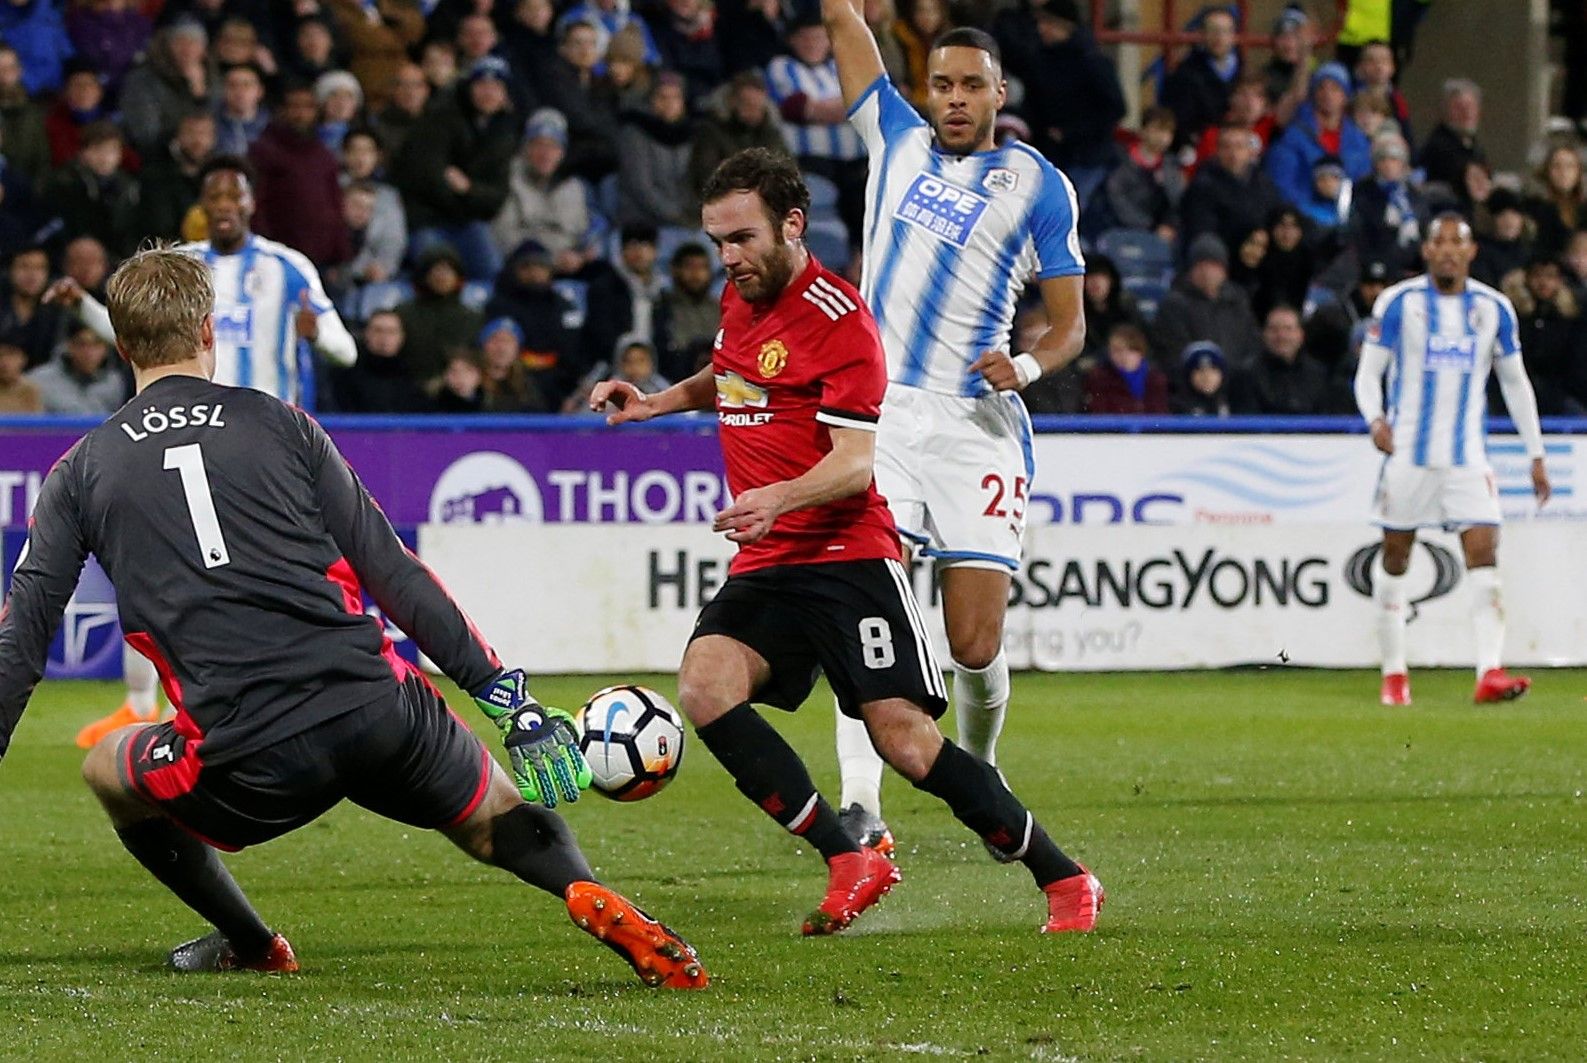 Soccer Football - FA Cup Fifth Round - Huddersfield Town vs Manchester United - John Smith’s Stadium, Huddersfield, Britain - February 17, 2018   Manchester United's Juan Mata scores a goal that is disallowed due to offside after VAR (Video Assistant Referee) is consulted    REUTERS/Andrew Yates